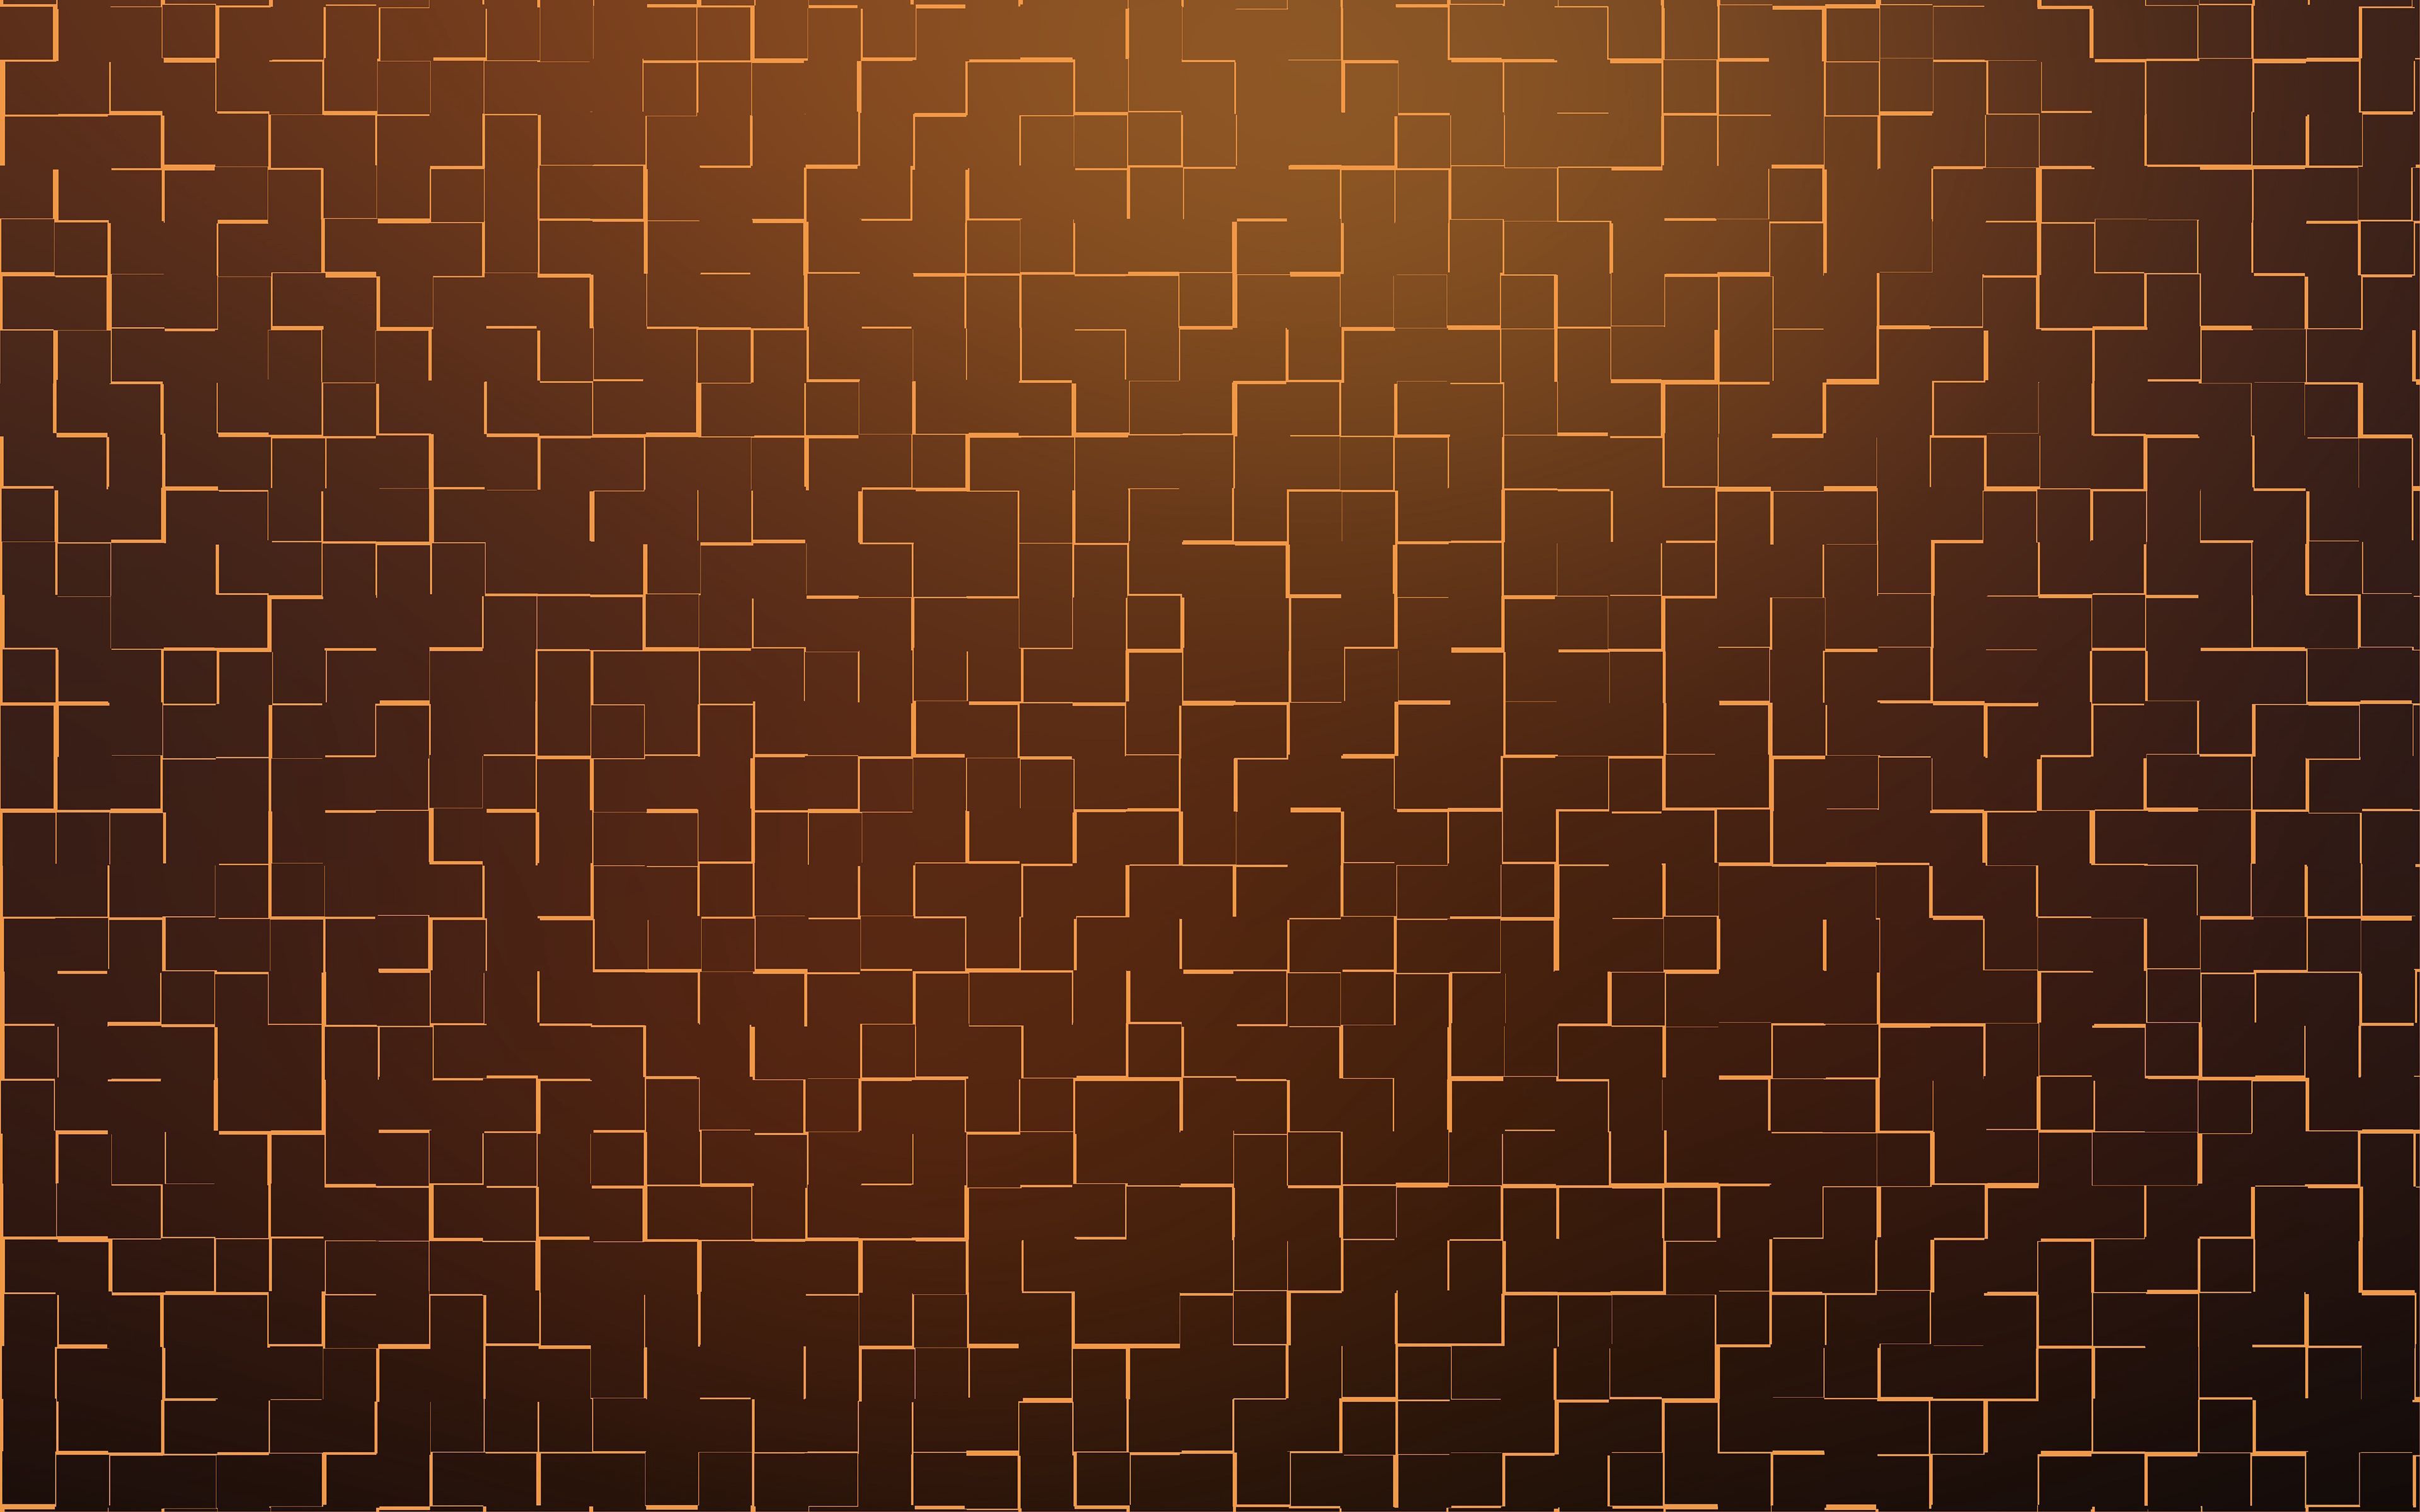 Download wallpaper 3840x2400 pattern, lines, gradient, abstraction, brick, brown 4k ultra HD 16:10 HD background